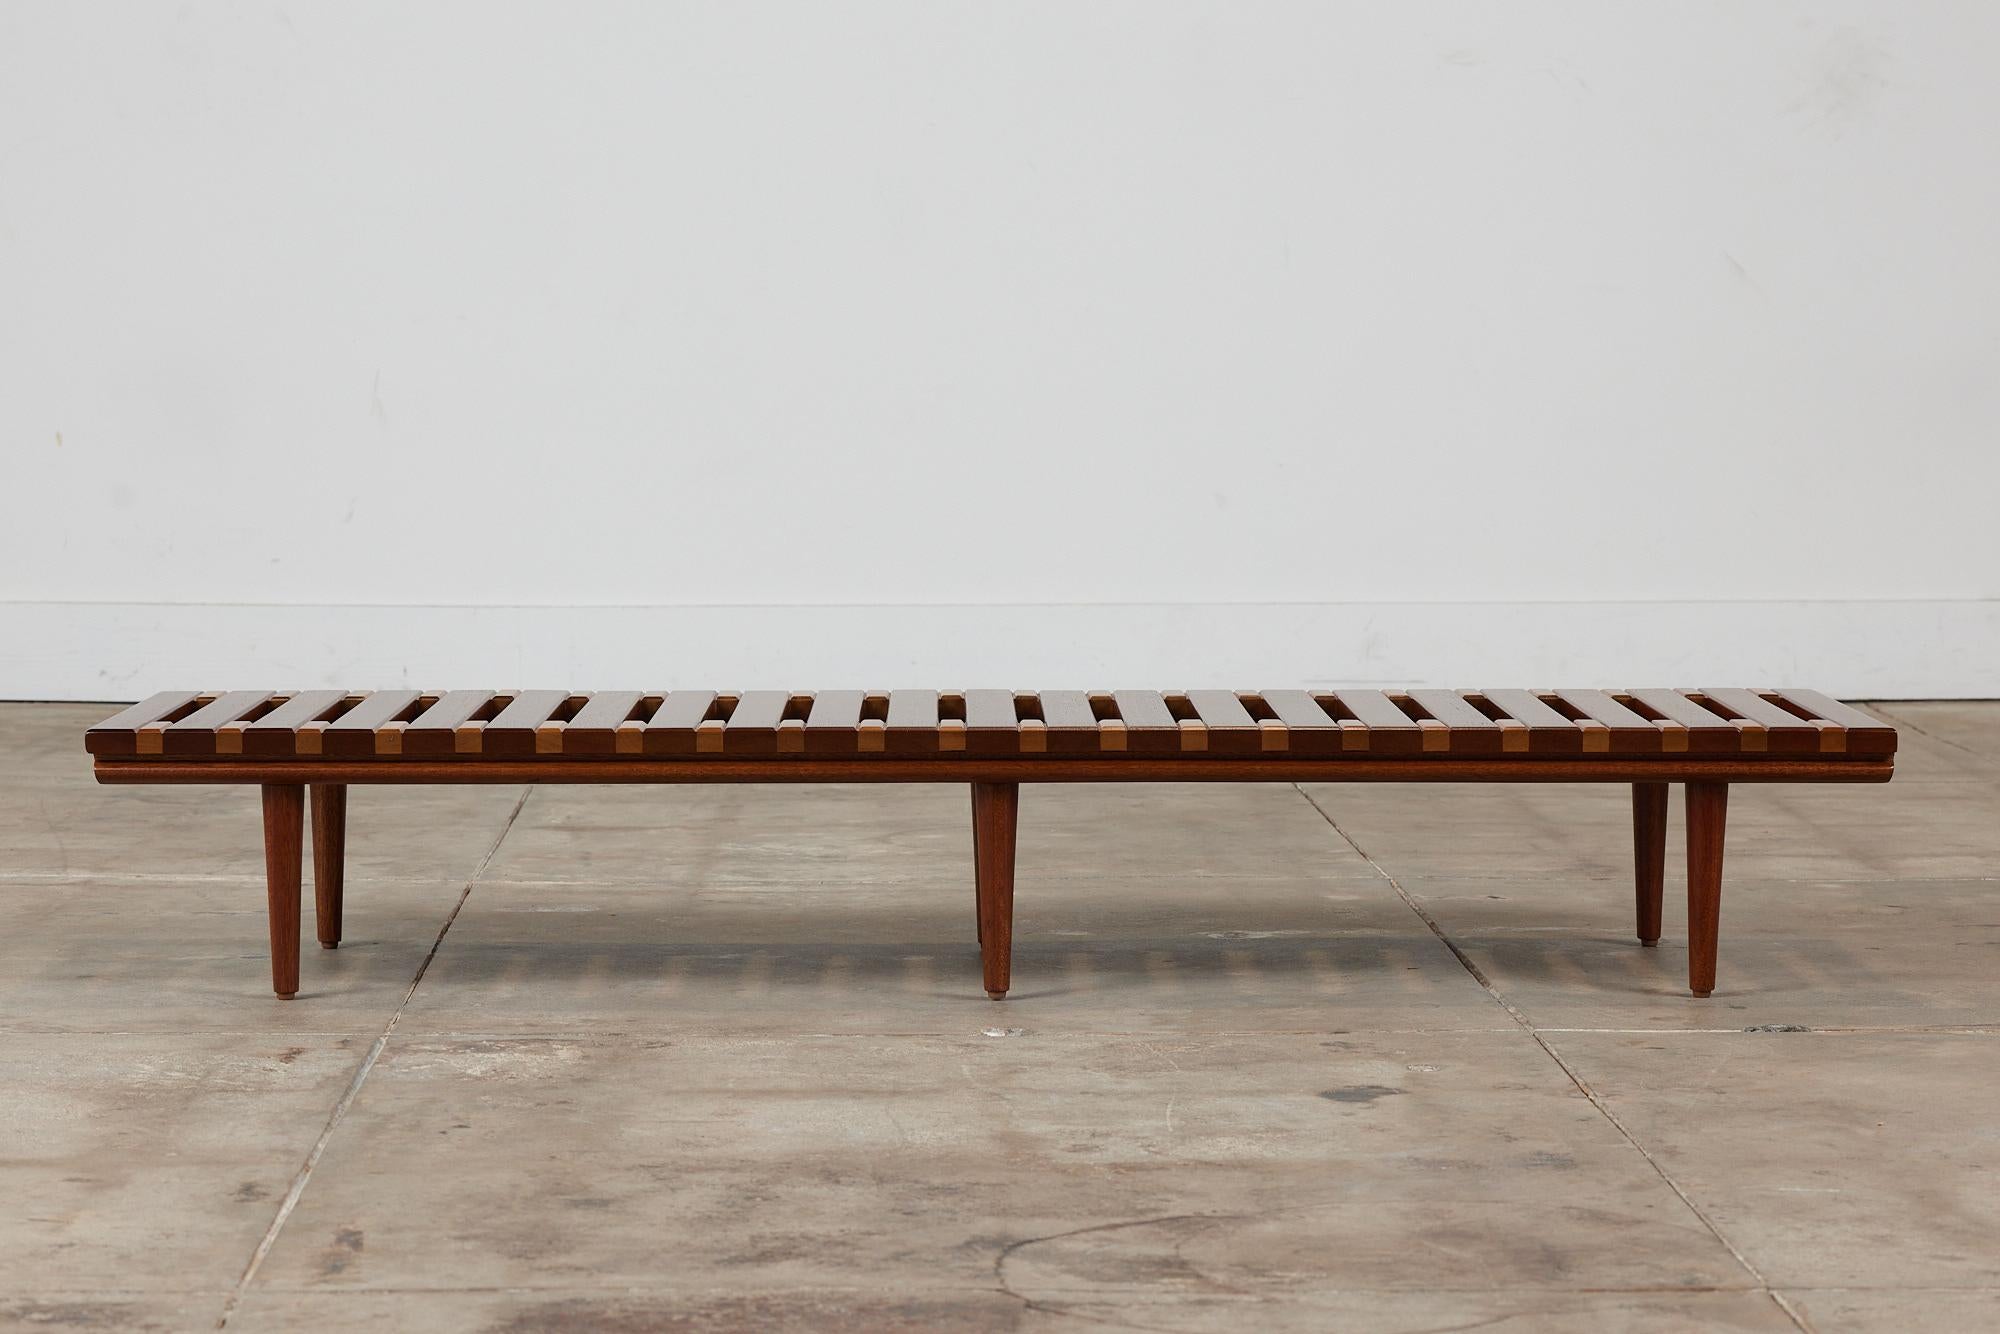 Low profile bench by John Keal for Brown Saltman, circa1950s, USA. The bench features a mix of mahogany and beech wood that offers texture and depth with varying wood tones. Perfect as a low profile coffee table, entryway bench or placed behind a